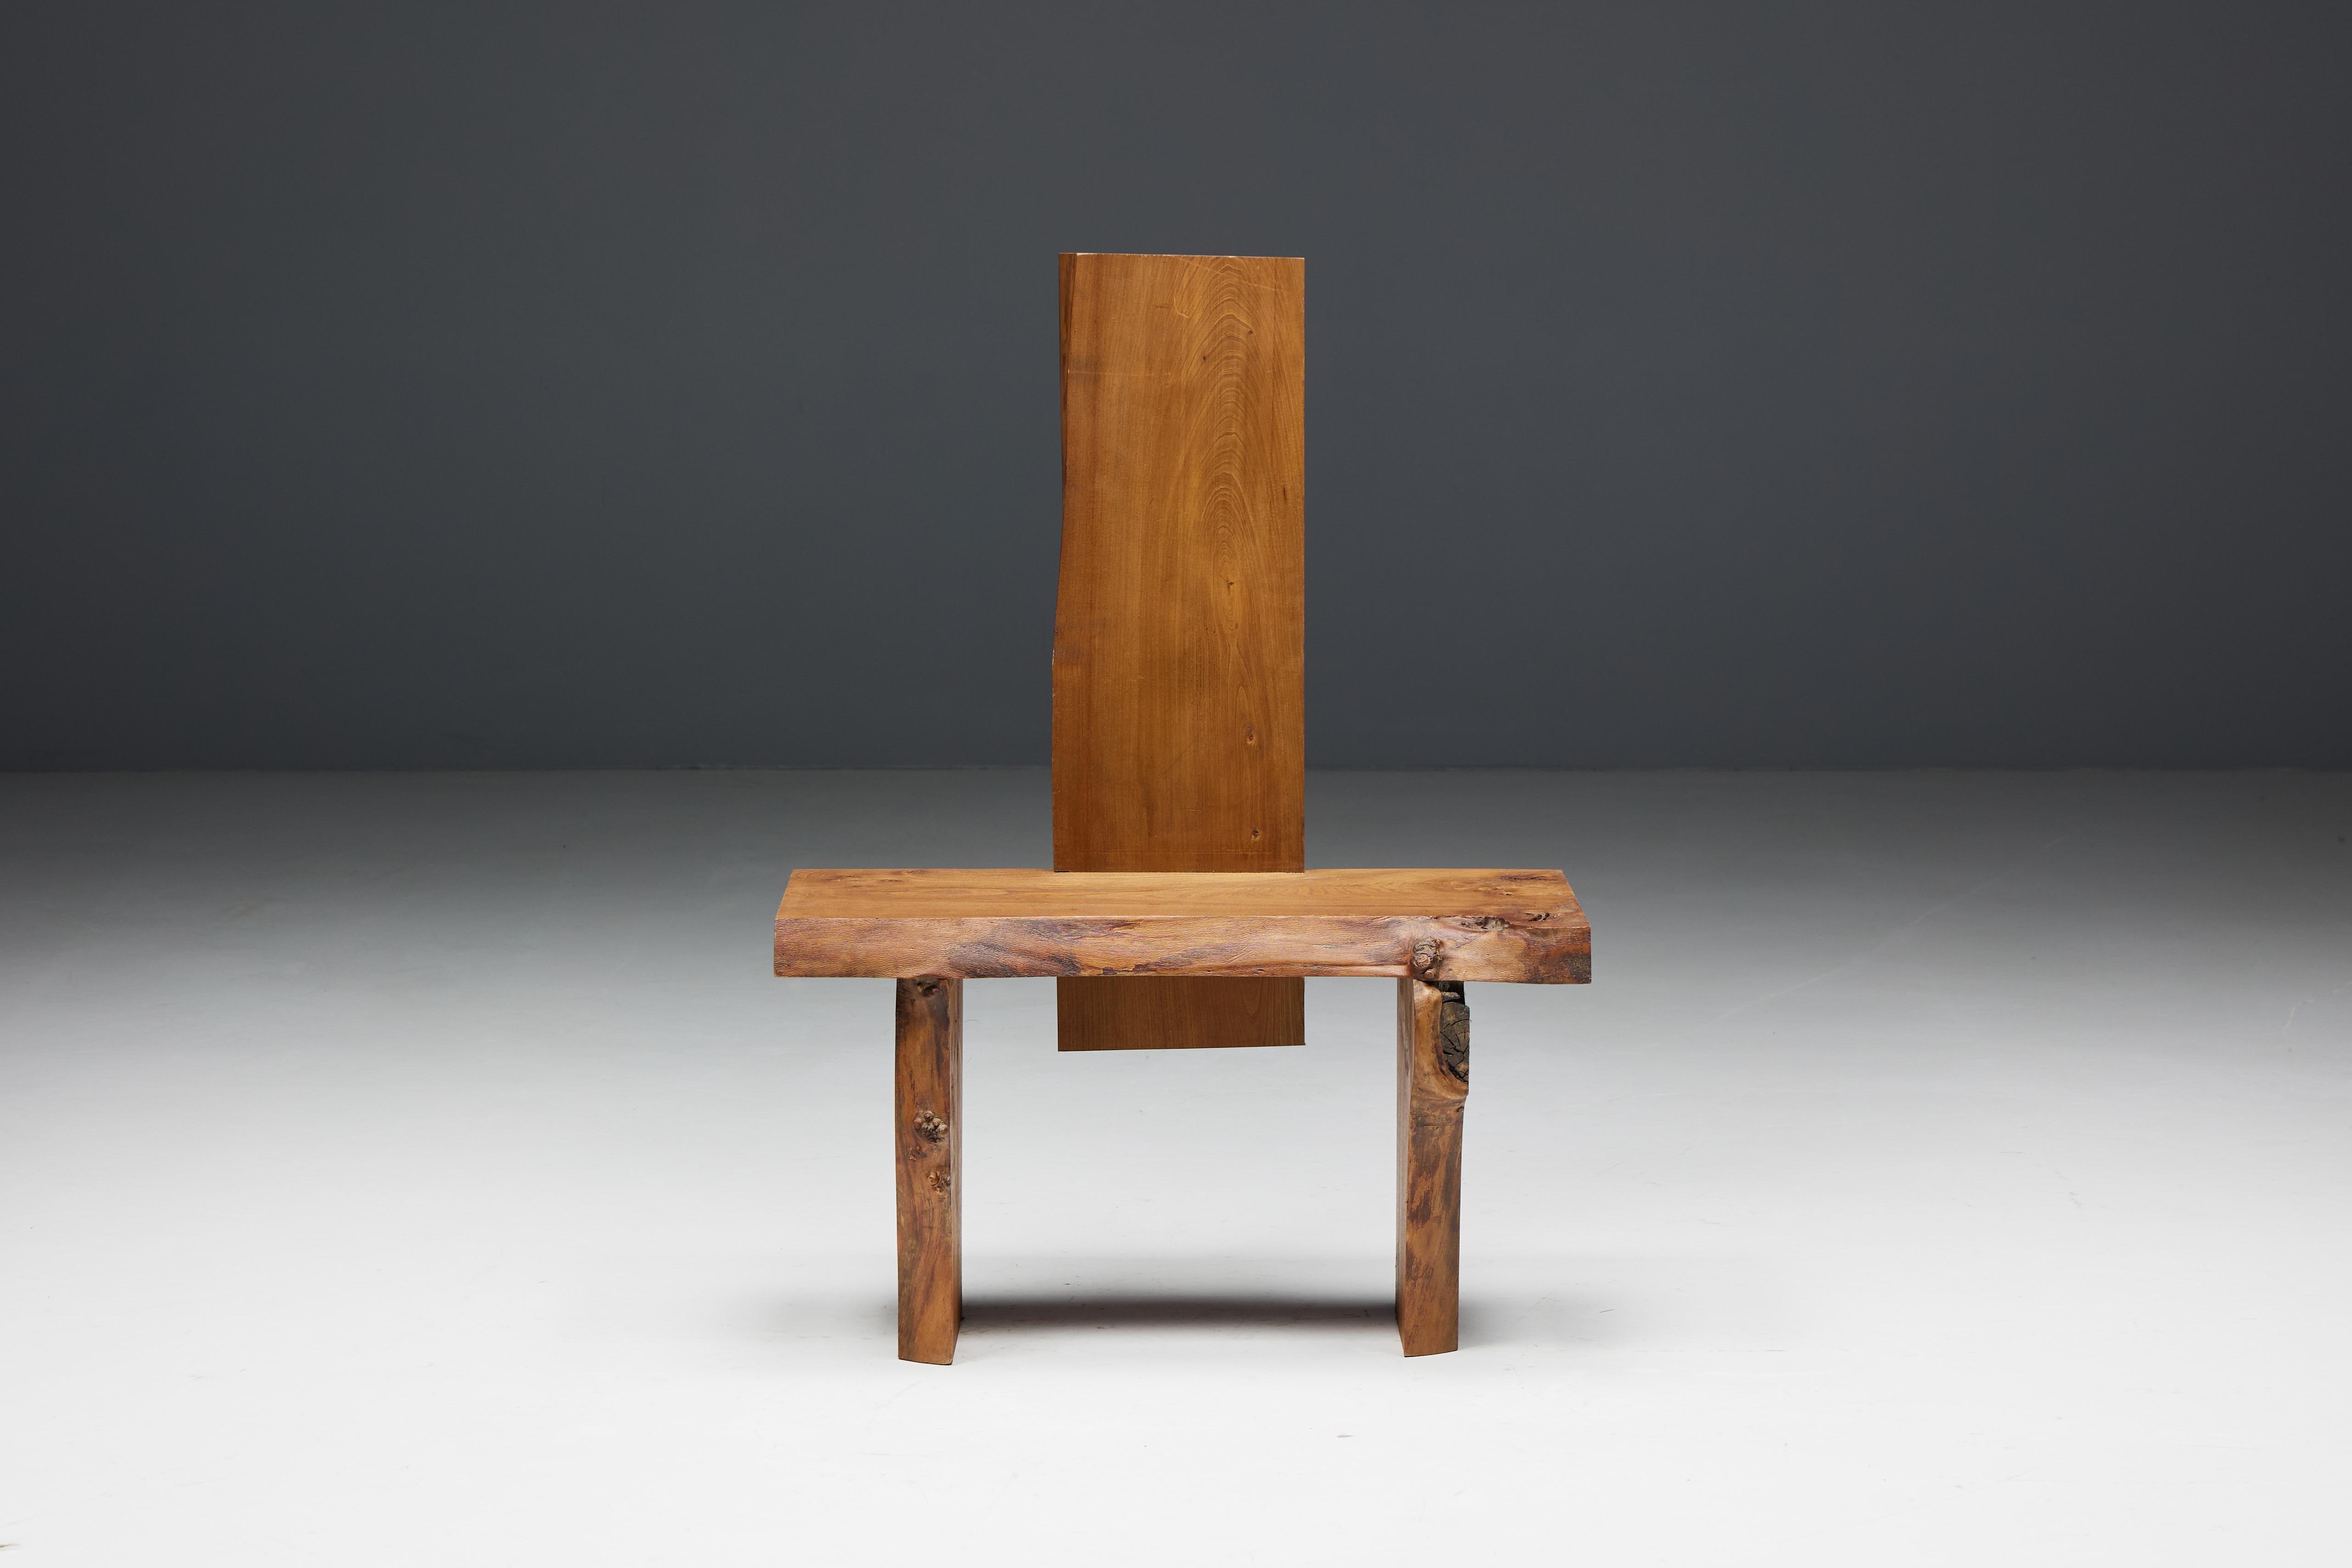 Brutalist high-back chair, a statement piece made from solid tree trunk planks. This chair embodies the raw essence of nature, showcasing its rugged beauty and unique textures. The high back makes a bold visual statement and adds an intriguing focal